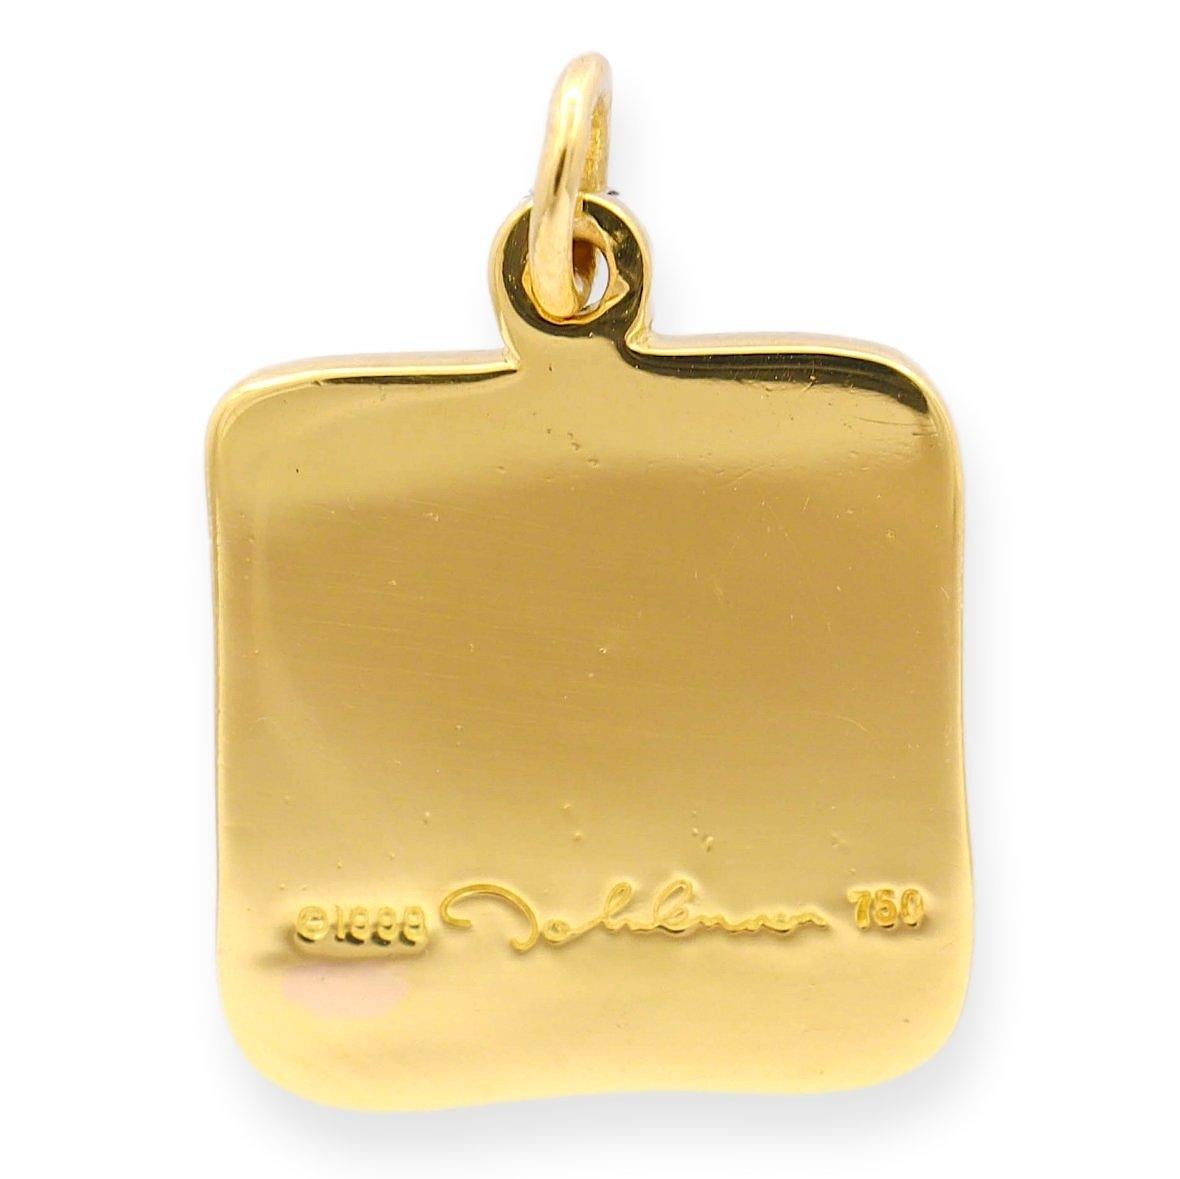 Vintage 1999 John Lennon Face Charm Pendant finely crafted in 18 karat yellow gold, this rare pendant features the iconic face of John Lennon. While touted as a collector's item, its artistic execution and condition leave much to be desired. The